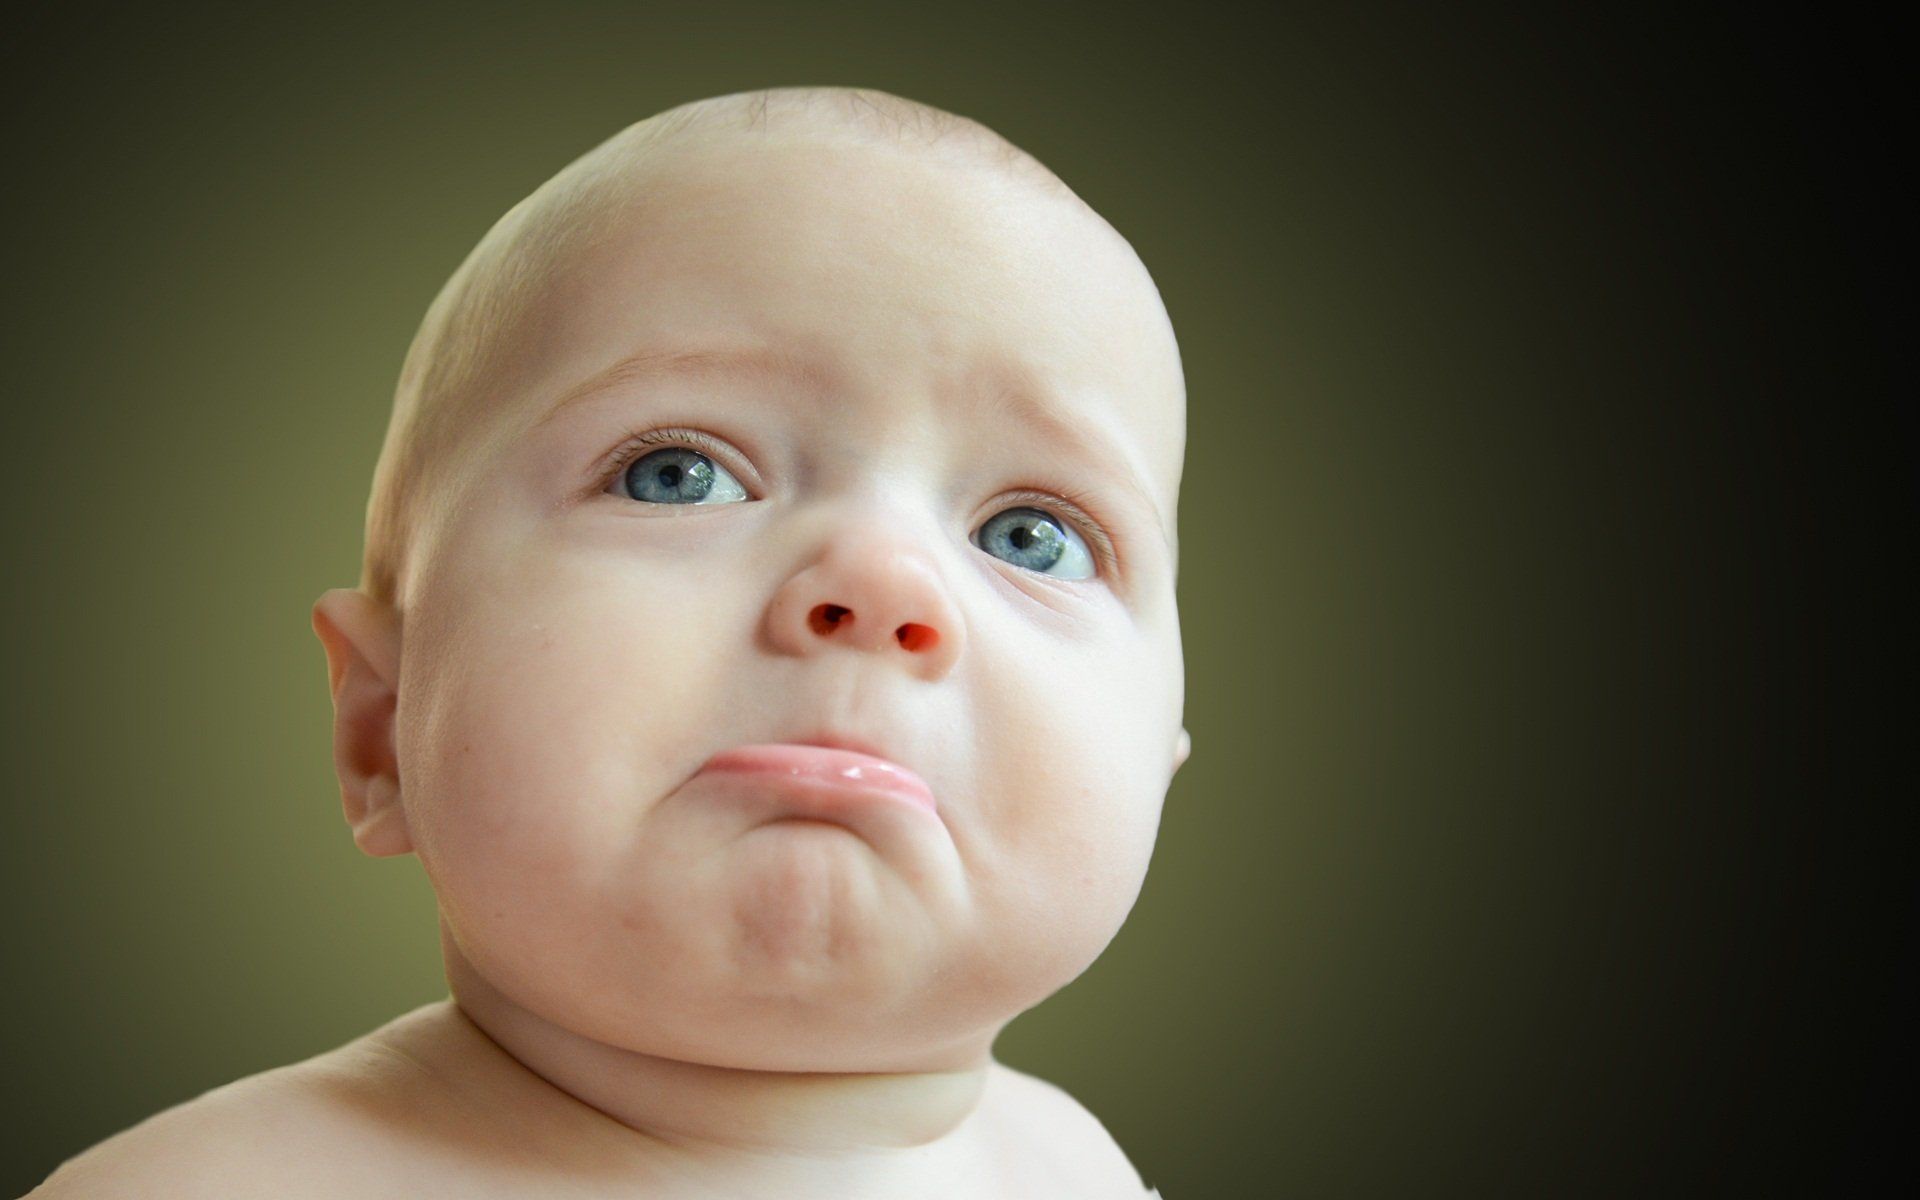 sad baby face images